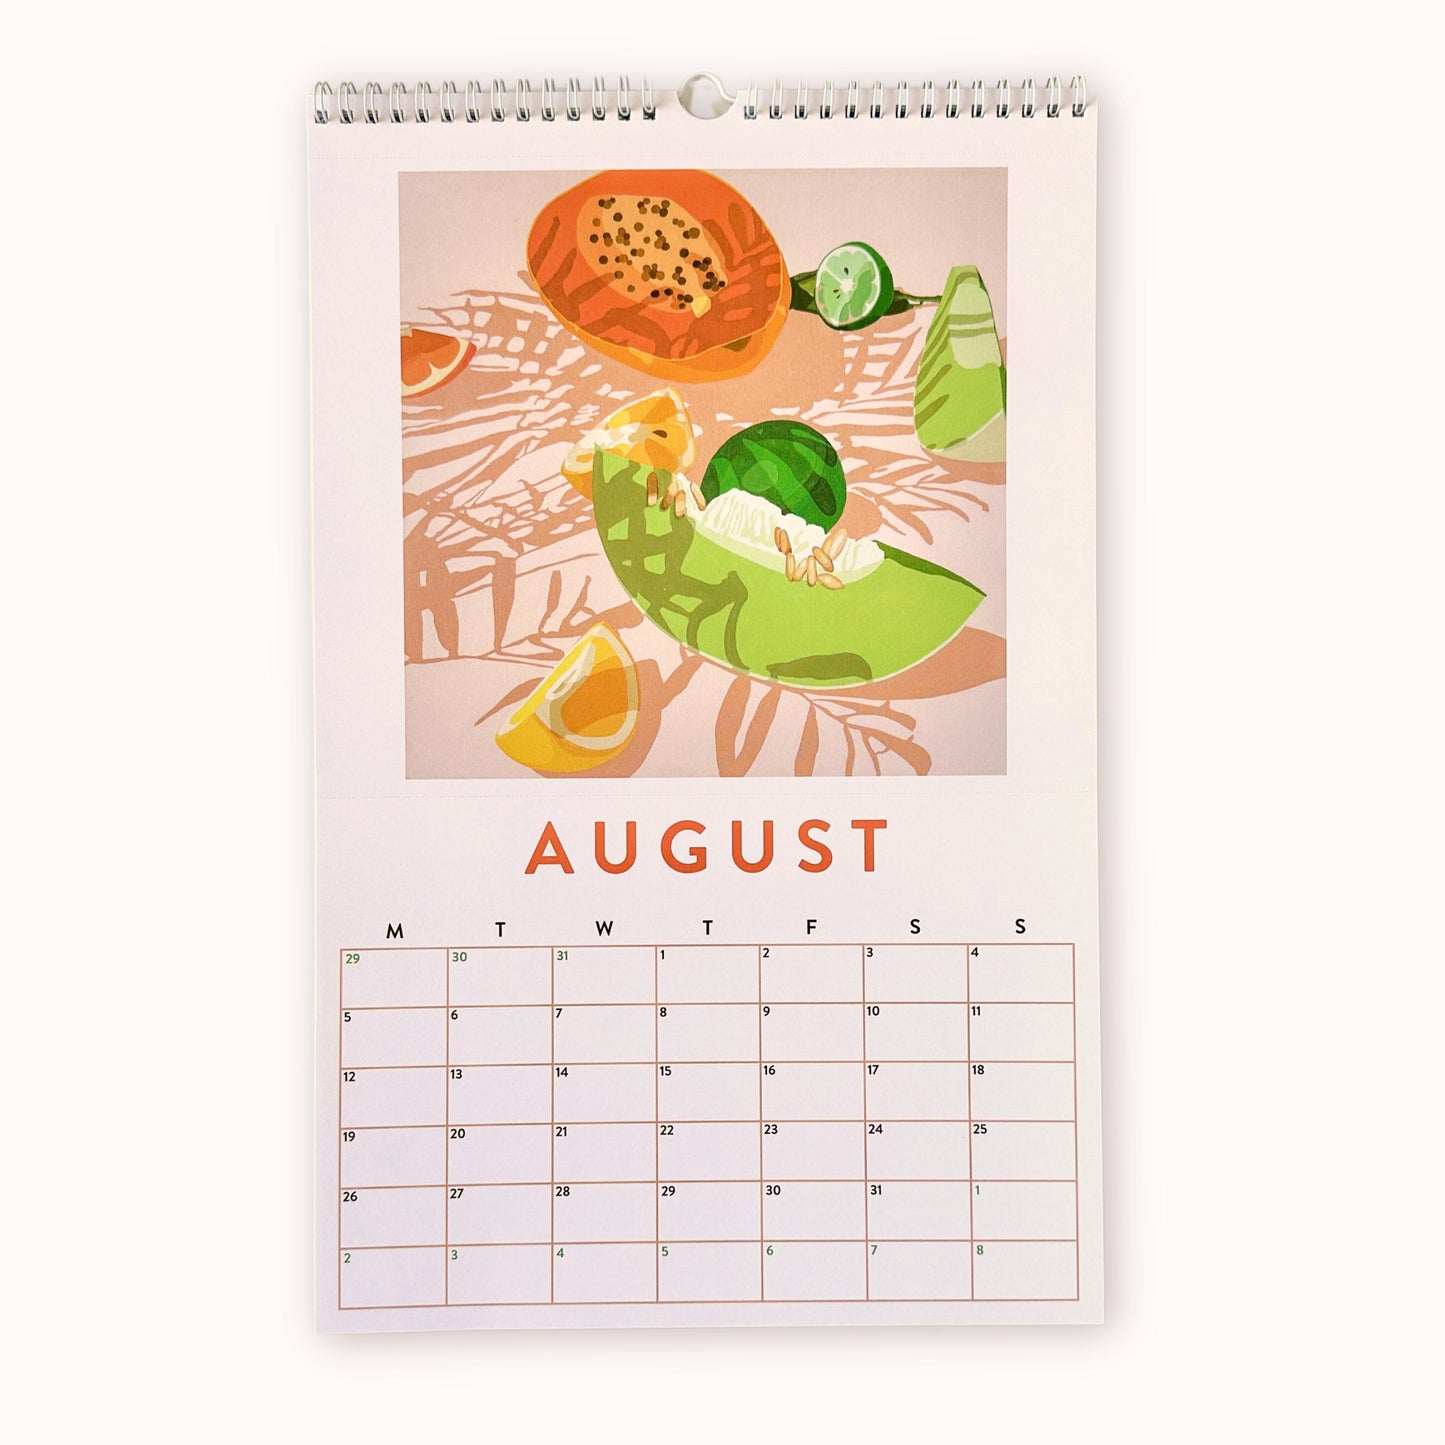 2024 art wall calendar in A3 size for the month of August, featuring a still life oil painting of fruits such as an orange papaya, a green rock melon, yellow lemon slices and limes on a creamy background with strong leaves shadows